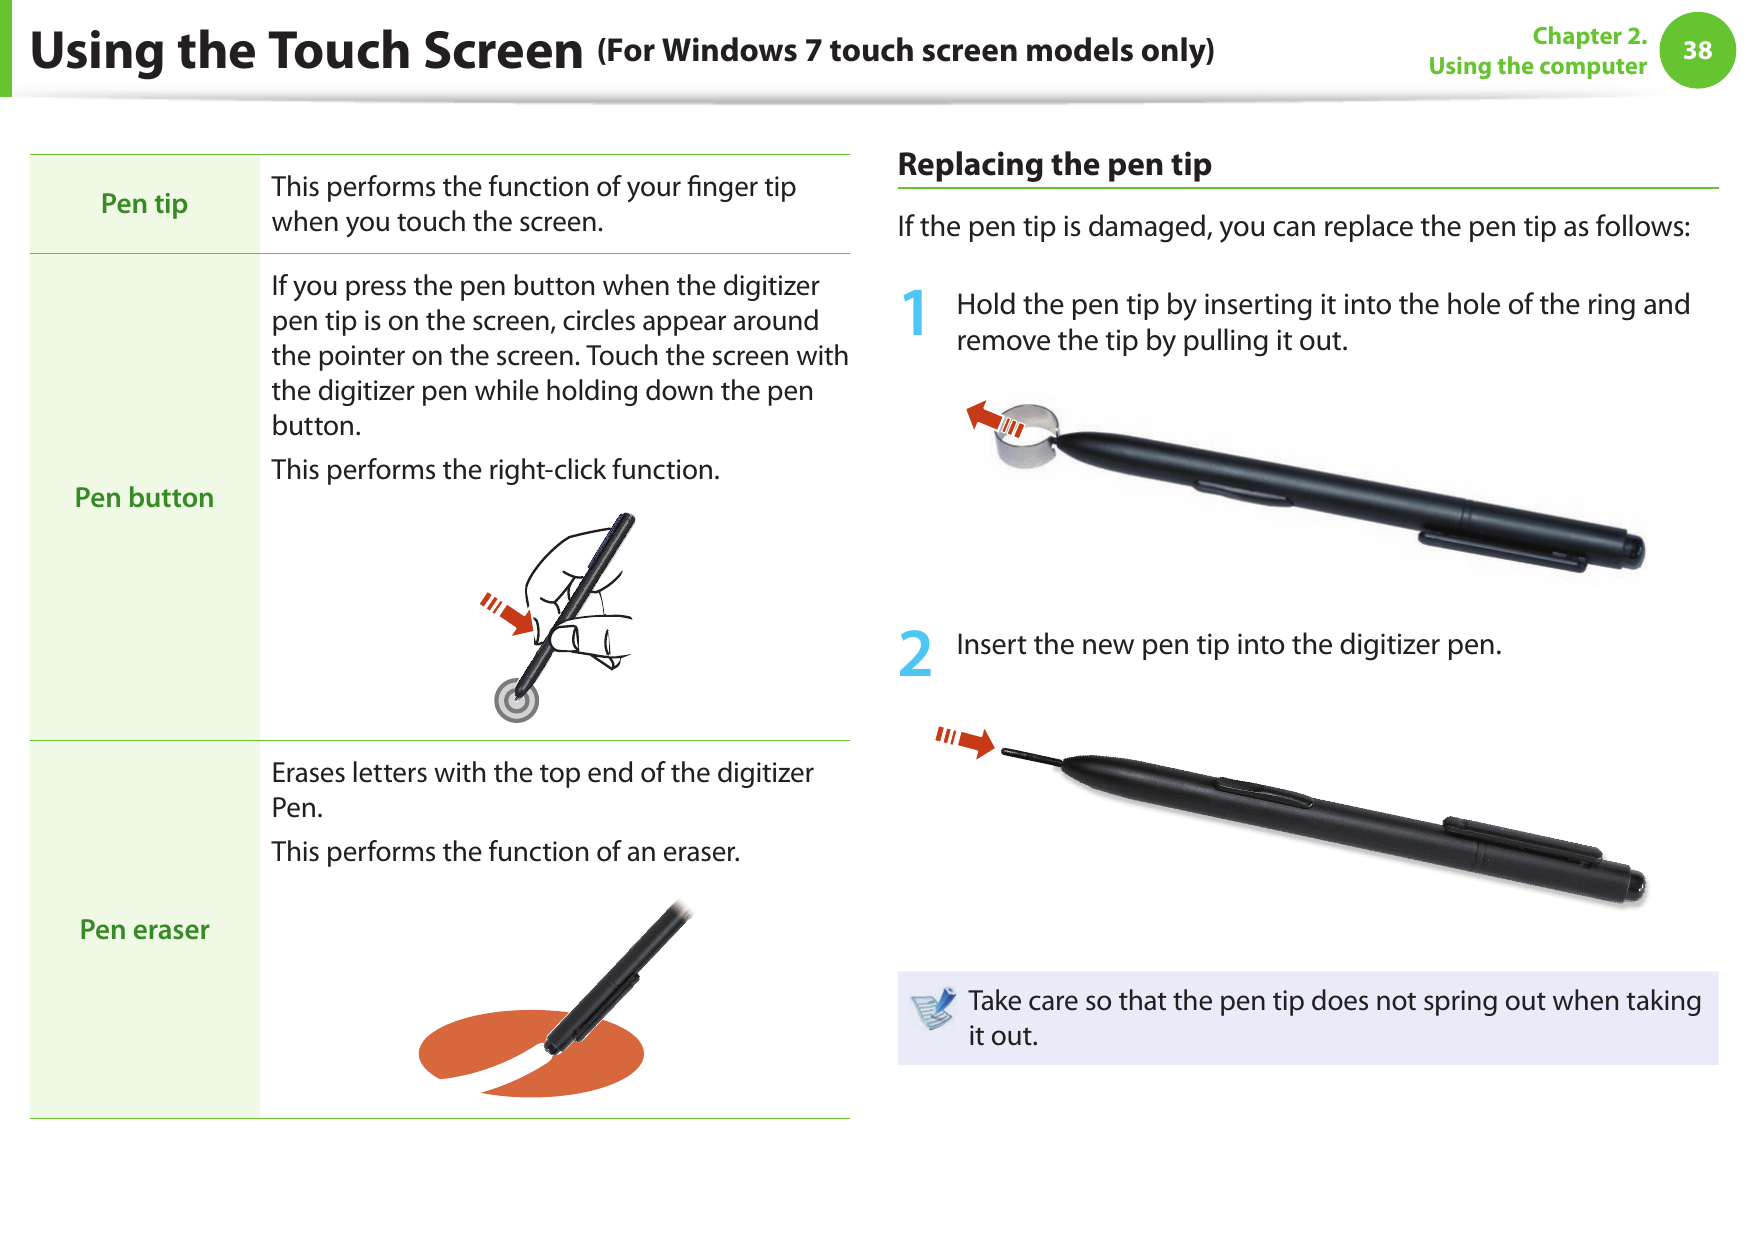 38Chapter 2. Using the computerUsing the Touch Screen (For Windows 7 touch screen models only)Pen tip This performs the function of your  nger tip when you touch the screen.Pen buttonIf you press the pen button when the digitizer pen tip is on the screen, circles appear around the pointer on the screen. Touch the screen with the digitizer pen while holding down the pen button.This performs the right-click function.Pen eraserErases letters with the top end of the digitizer Pen.This performs the function of an eraser.Replacing the pen tipIf the pen tip is damaged, you can replace the pen tip as follows:1 Hold the pen tip by inserting it into the hole of the ring and remove the tip by pulling it out.2 Insert the new pen tip into the digitizer pen.Take care so that the pen tip does not spring out when taking it out. 